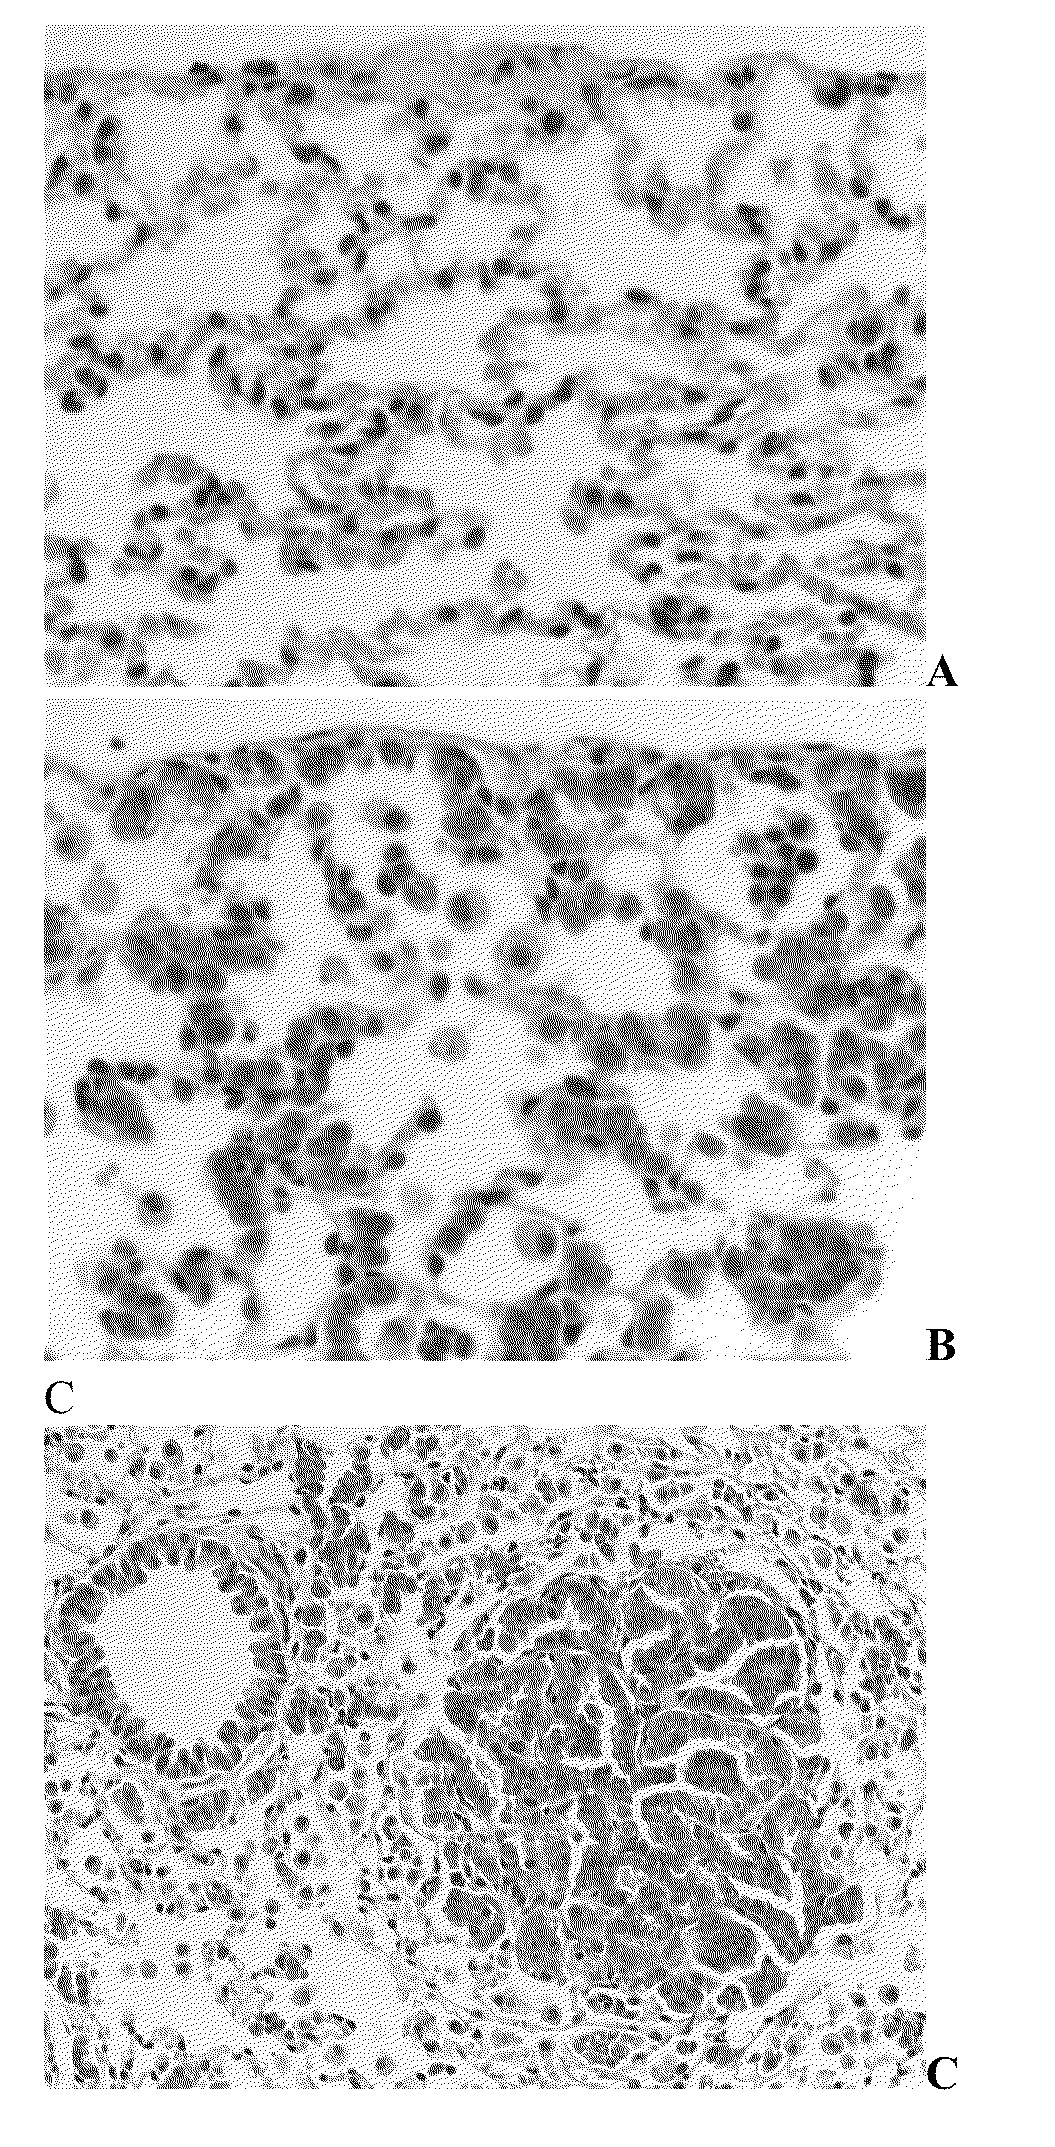 Medicament, compositions, and substances for treating and identifying adenocarcinoma of the lung